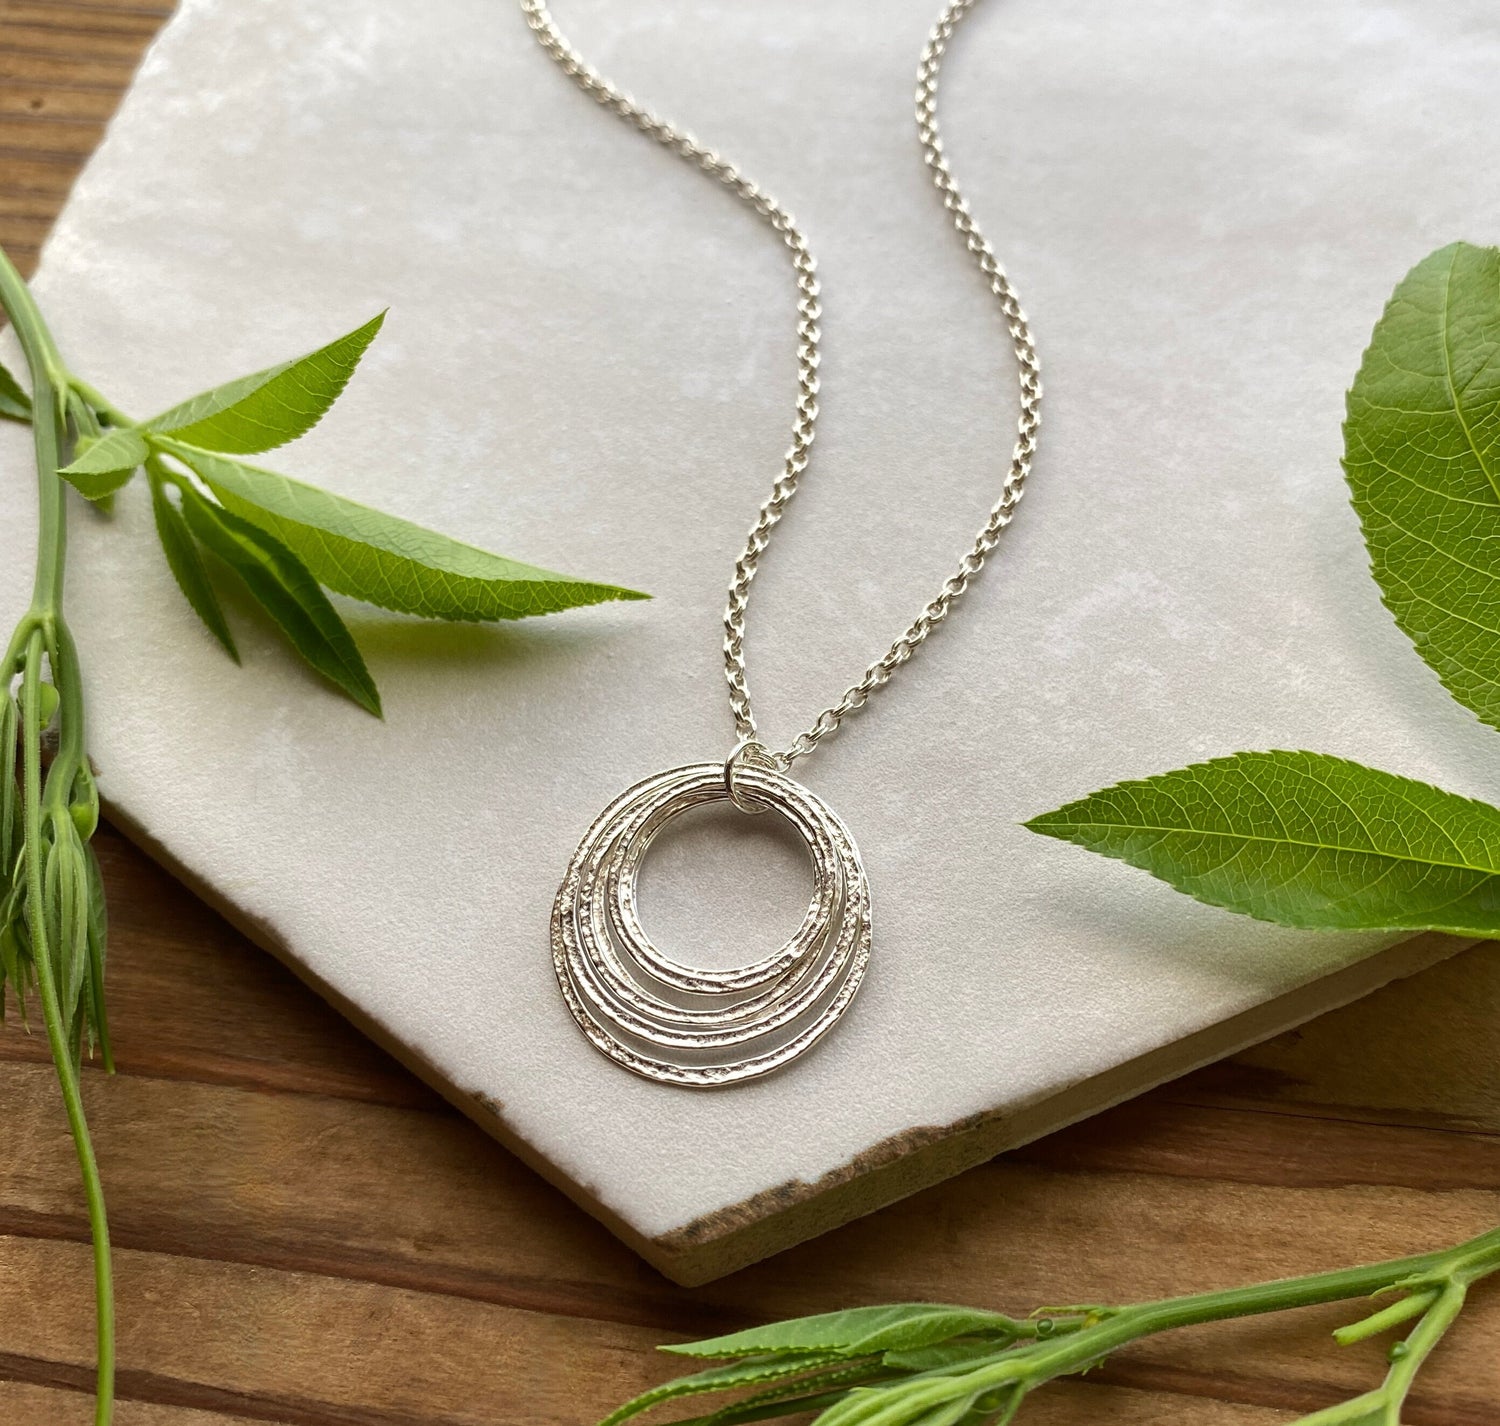 7 Circle 70th Minimalist Milestone Birthday Necklace, Sterling Silver 7 Rings Seven Decades Handcrafted Perfectly Imperfect Circle Pendant